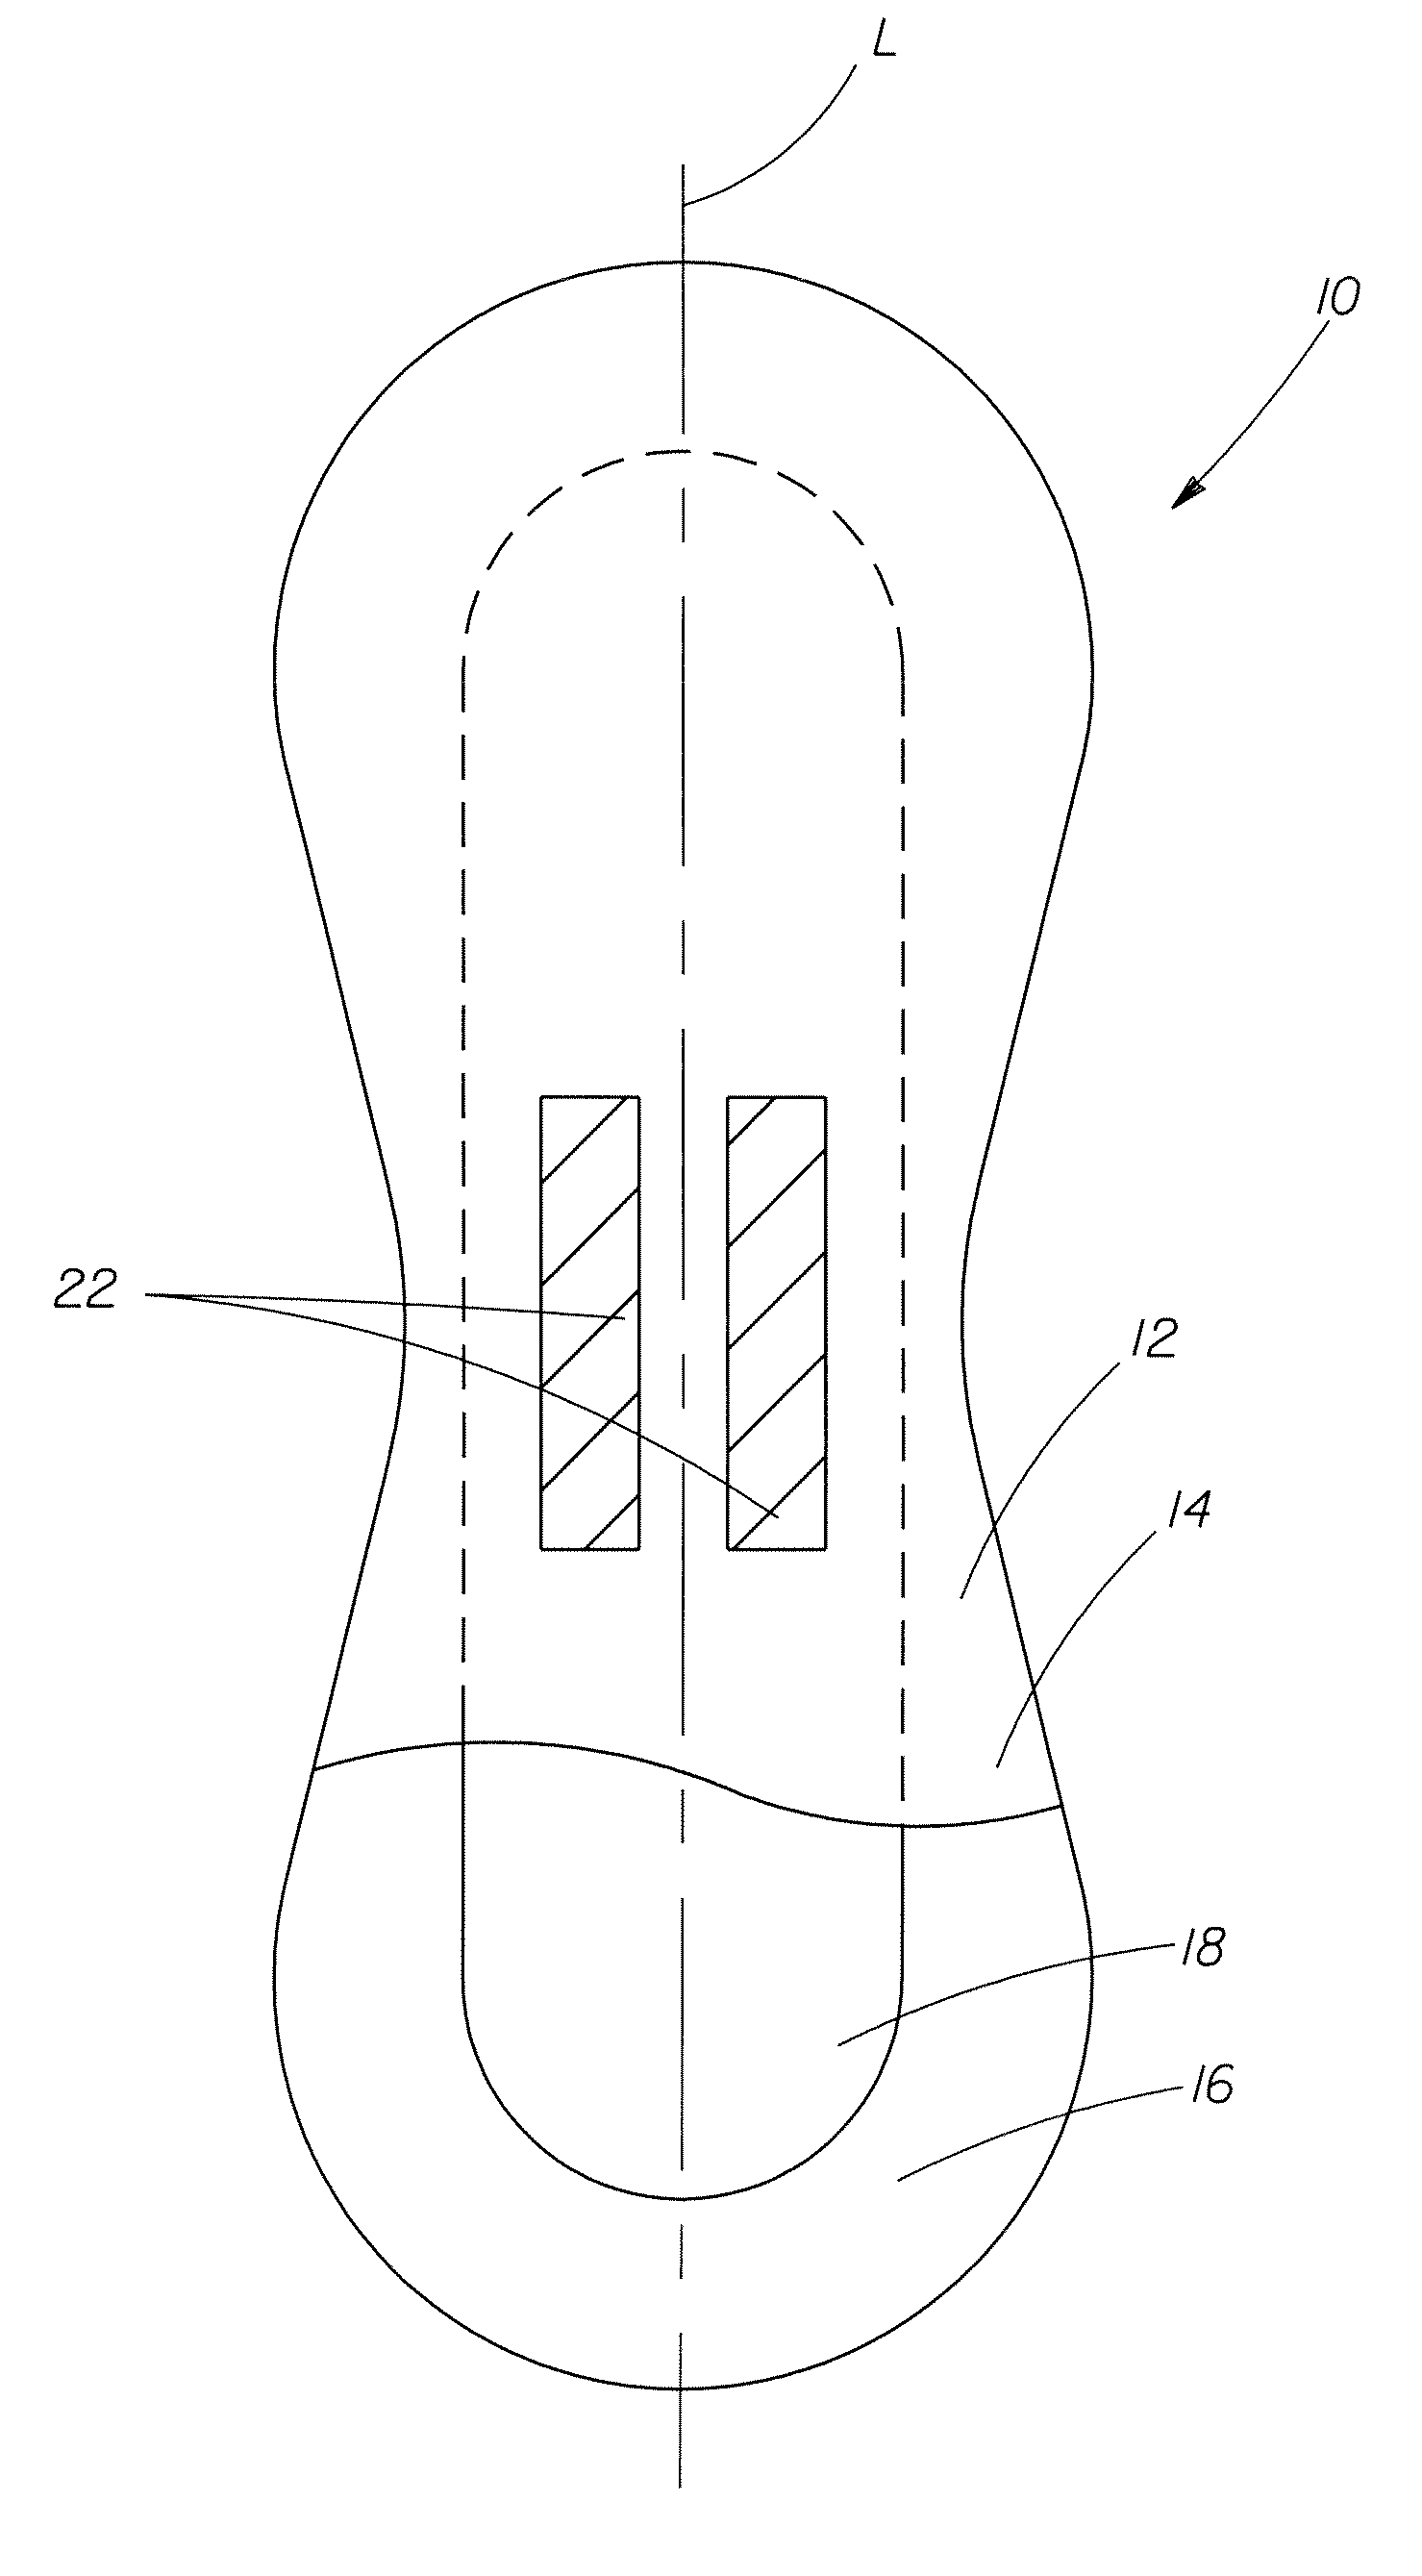 Absorbent article with lotion comprising a polypropylene glycol material